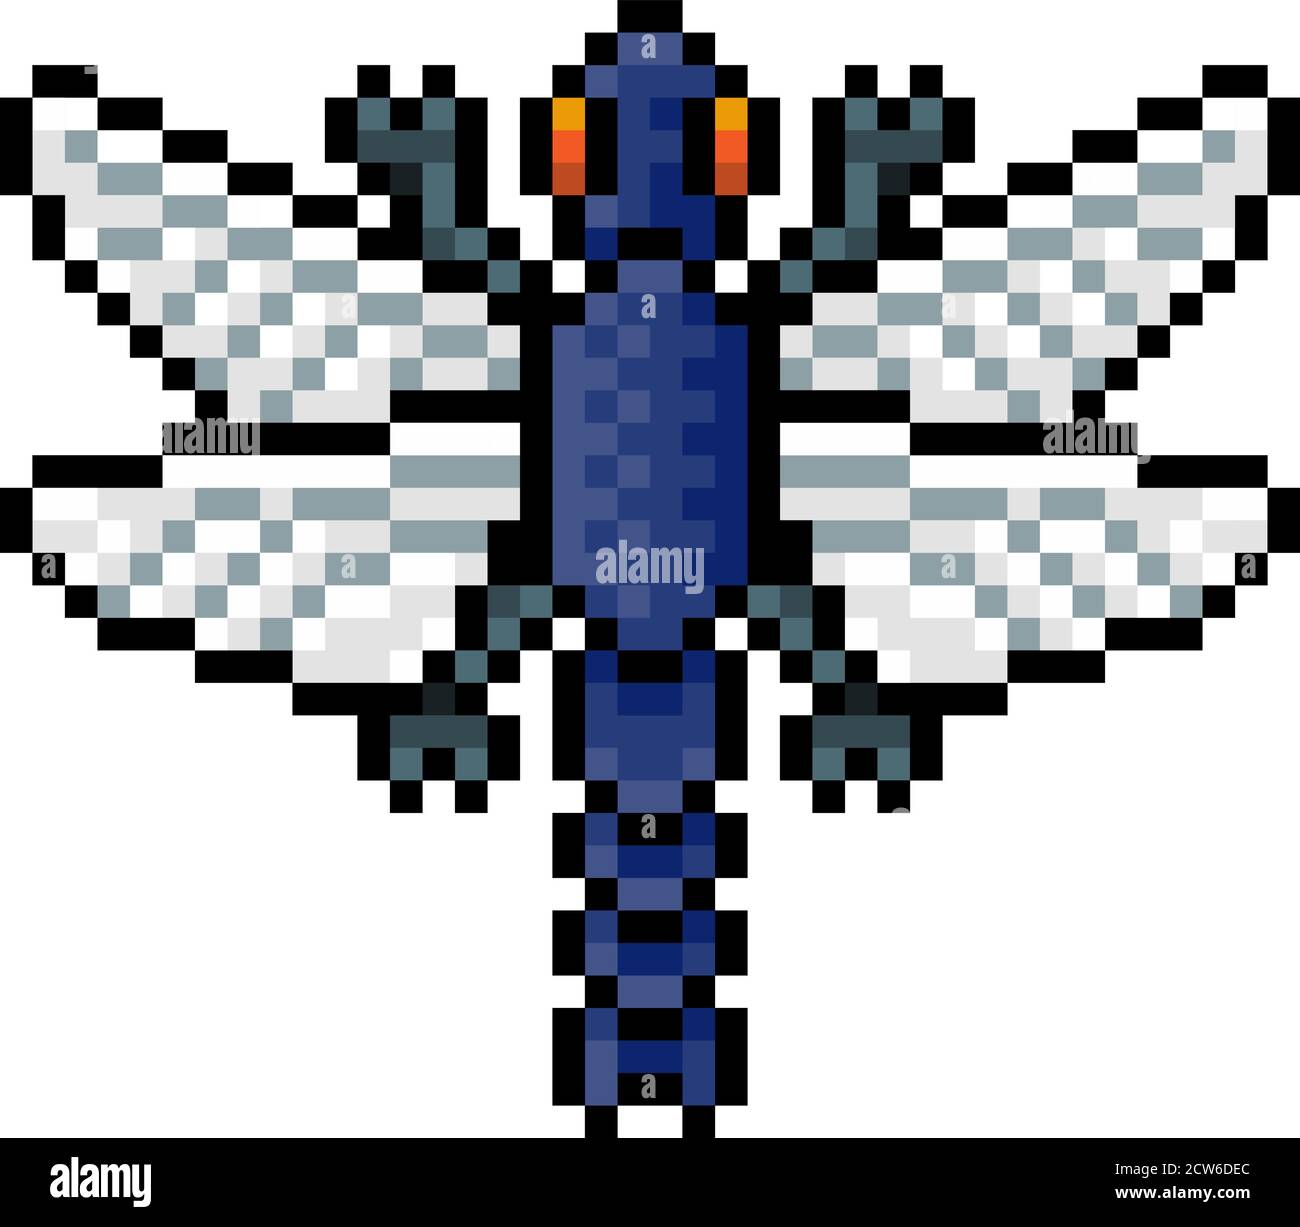 Dragonfly Bug Insect Pixel Art Video Game Icon Stock Vector